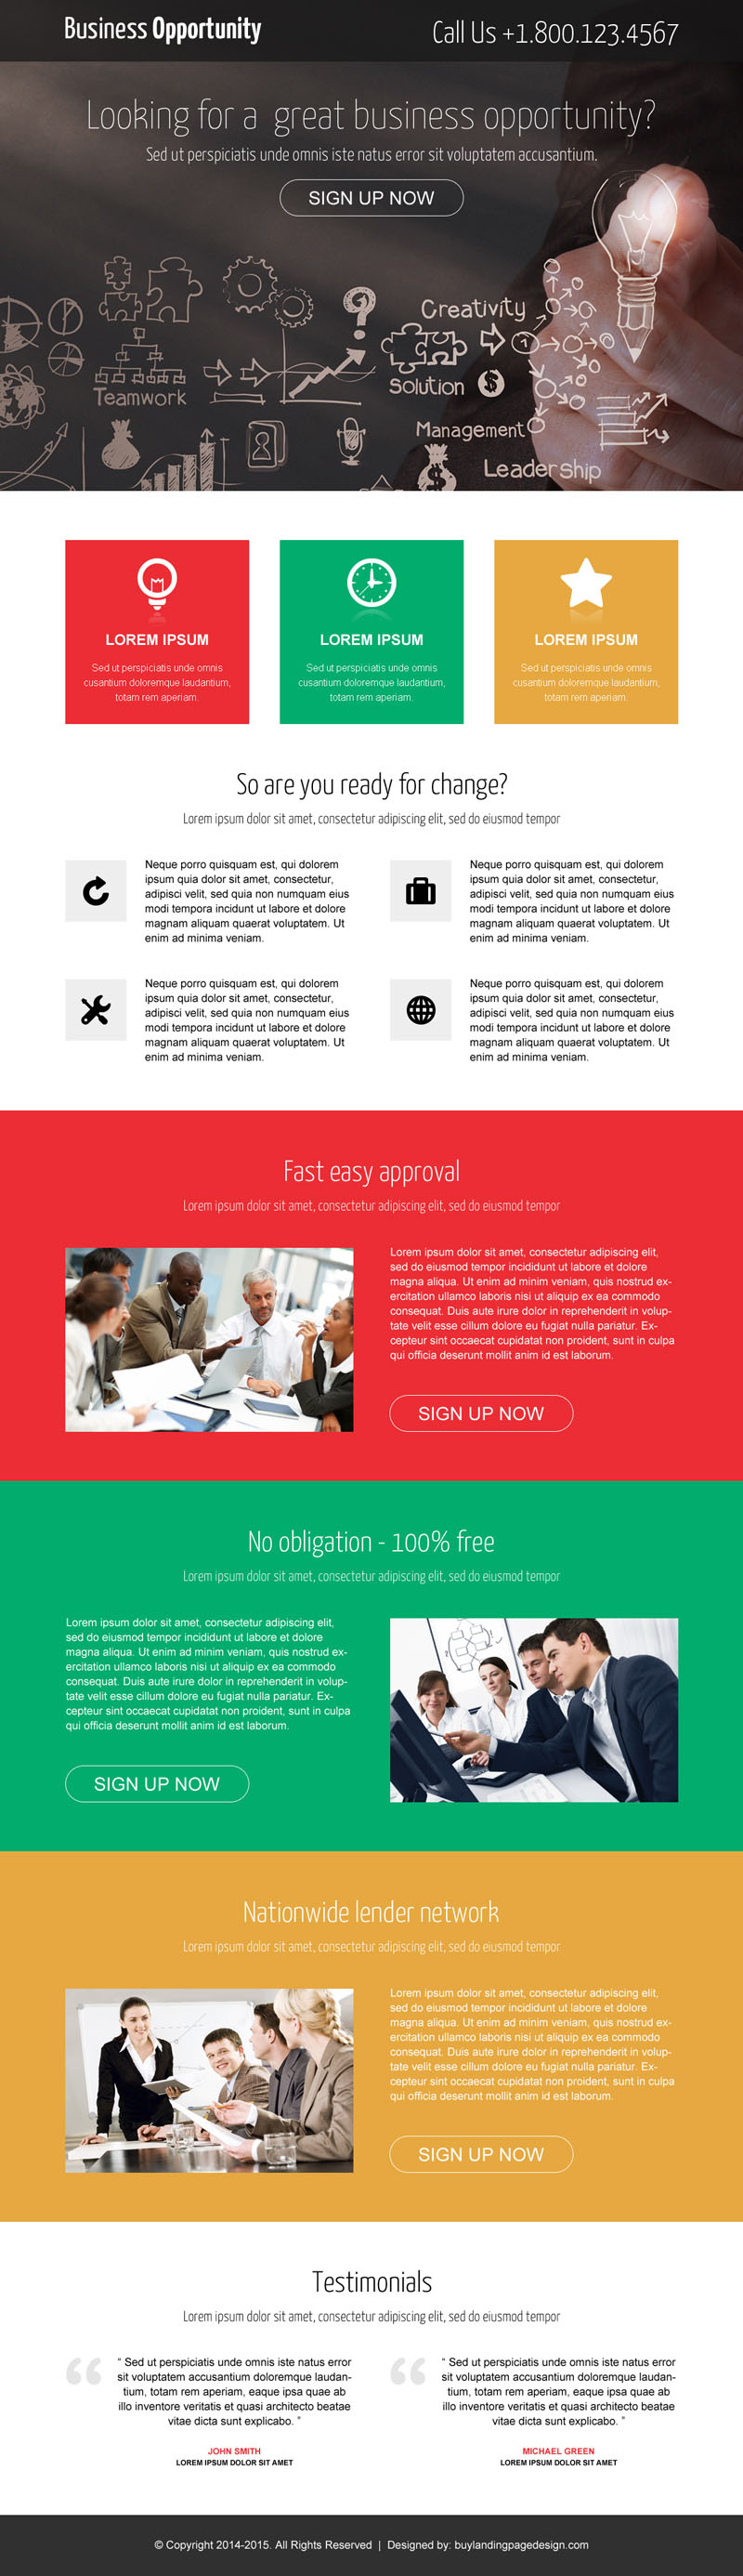 great-business-opportunity-call-to-action-landing-page-design-template-028